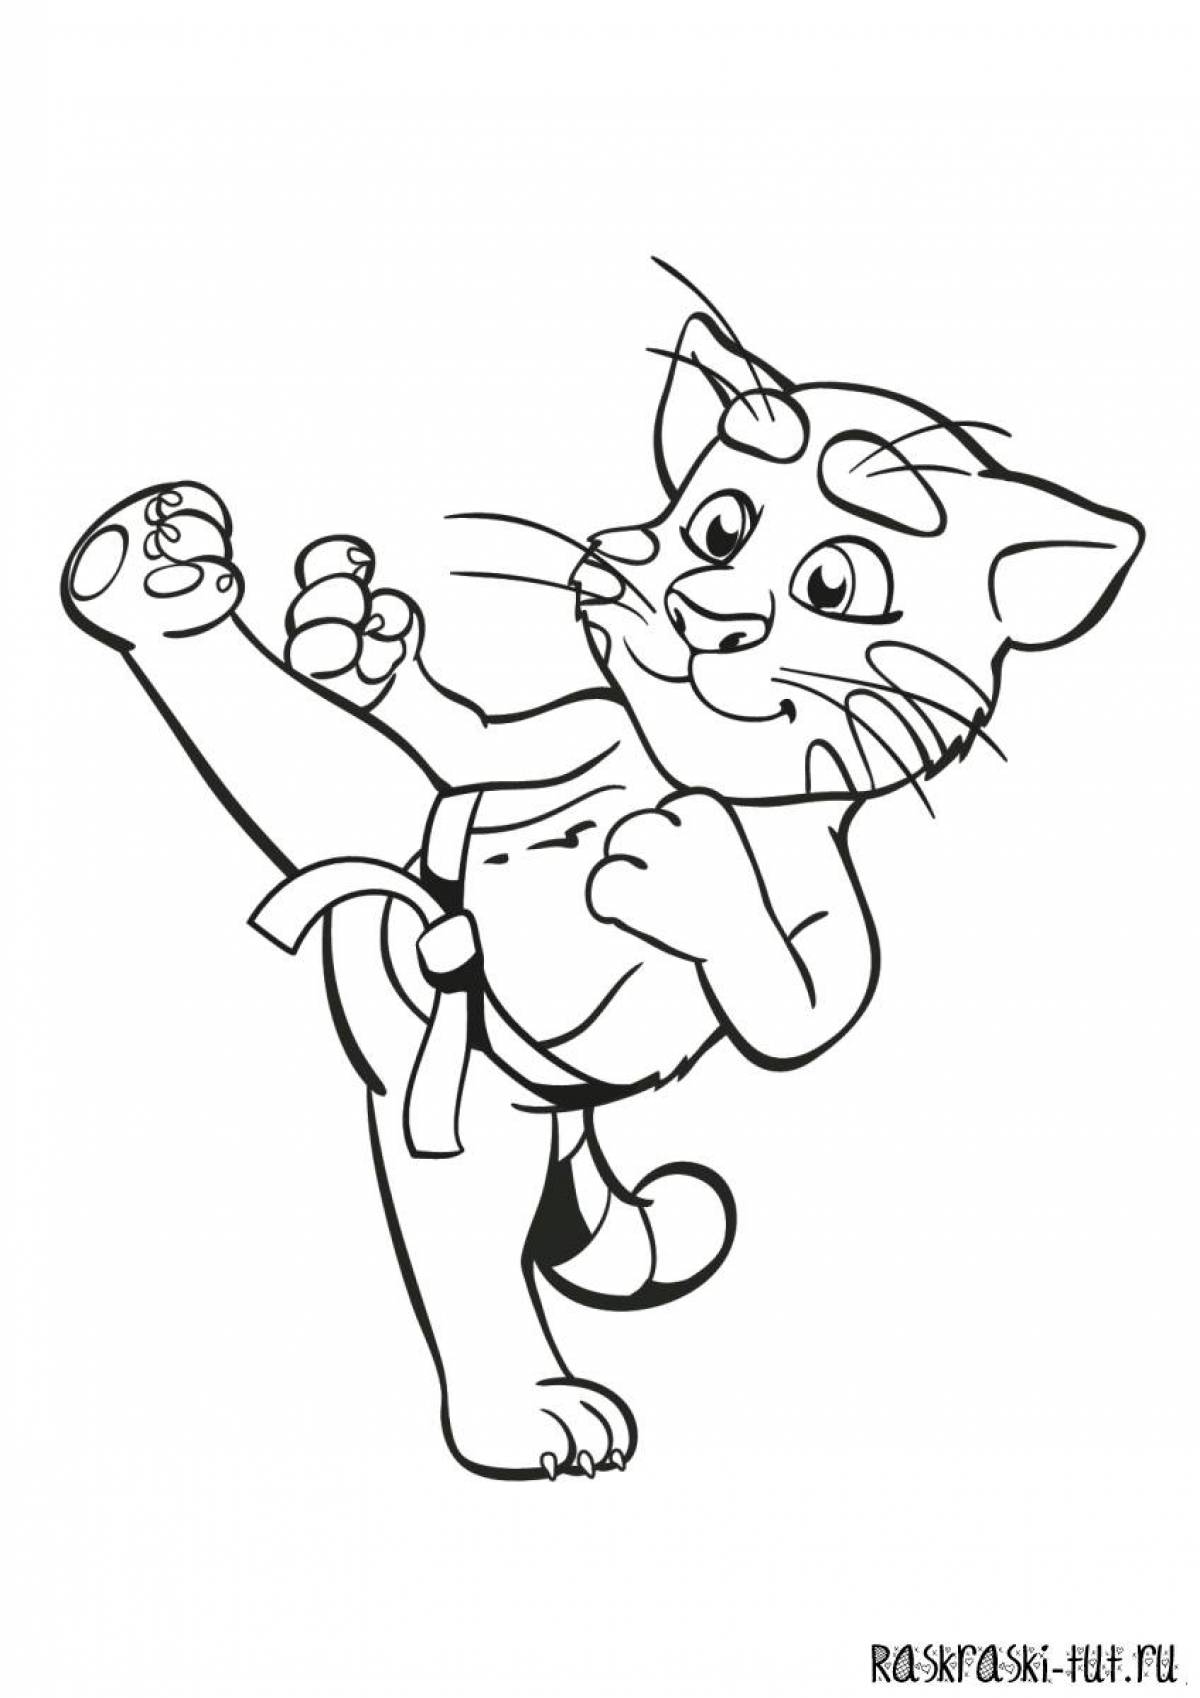 Tom the cat's playful coloring page